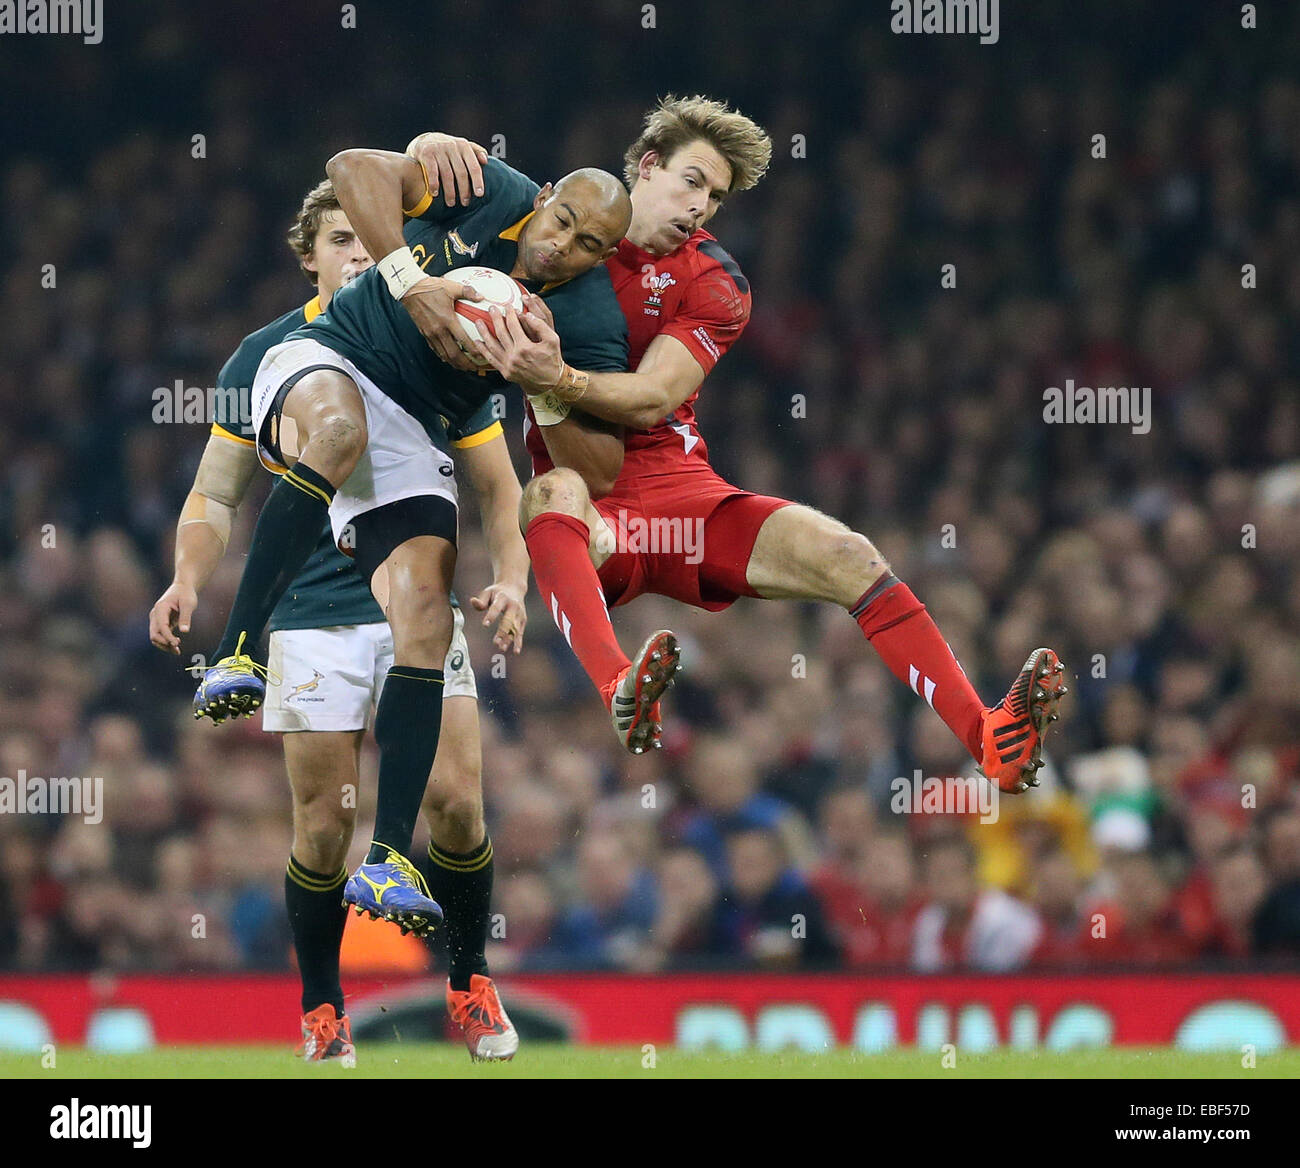 Cardiff, UK. 29th Nov, 2014. Cornal Hendricks of South Africa tackled by Liam Williams of Wales - Autumn Internationals - Wales vs South Africa - Millennium Stadium - Cardiff - Wales - 29th November 2014 - Picture Simon Bellis/Sportimage. Credit:  csm/Alamy Live News Stock Photo